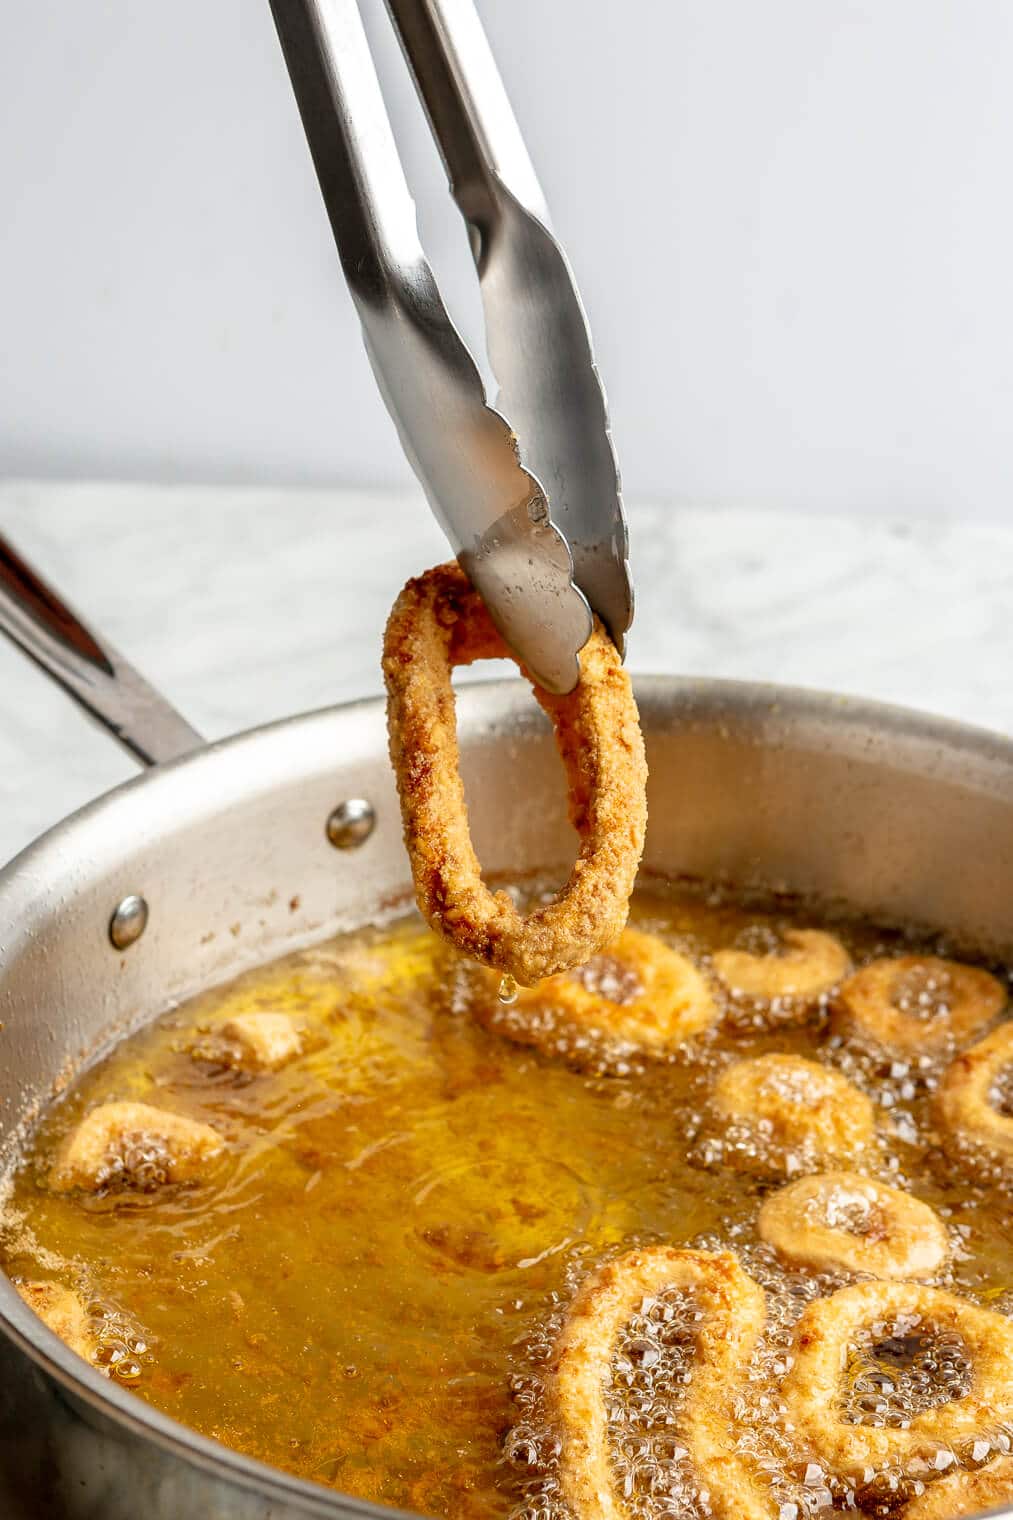 A person using metal tongs to take a fried calamari ring out of a pan of hot oil while more calamari rings continue to fry.